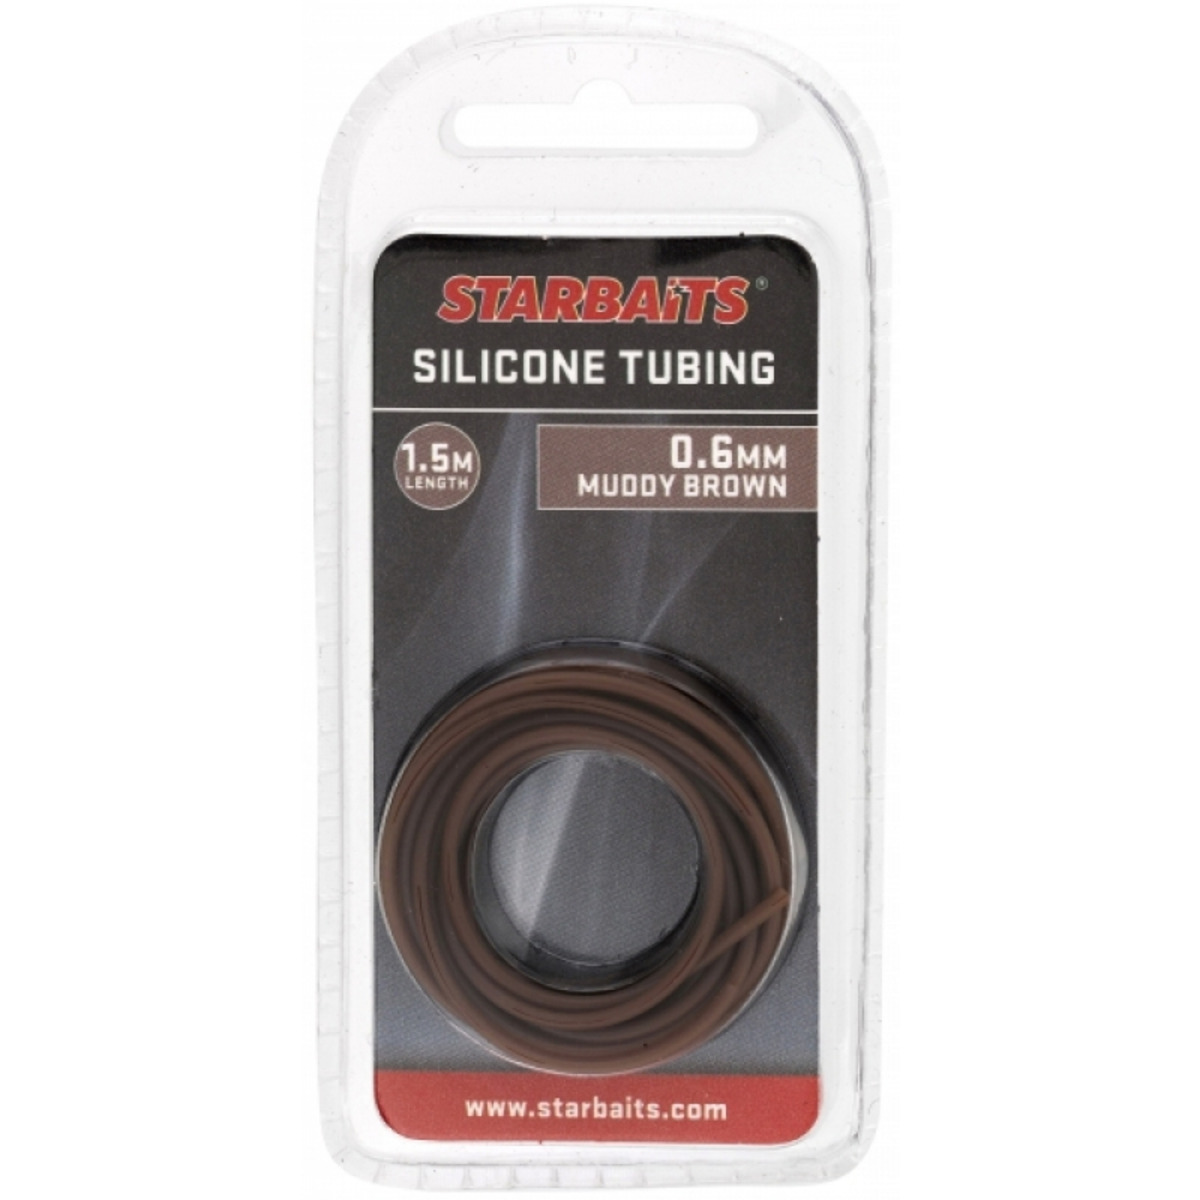 Starbaits Silicone Tubing 0.6mm - MUDDY BROWN